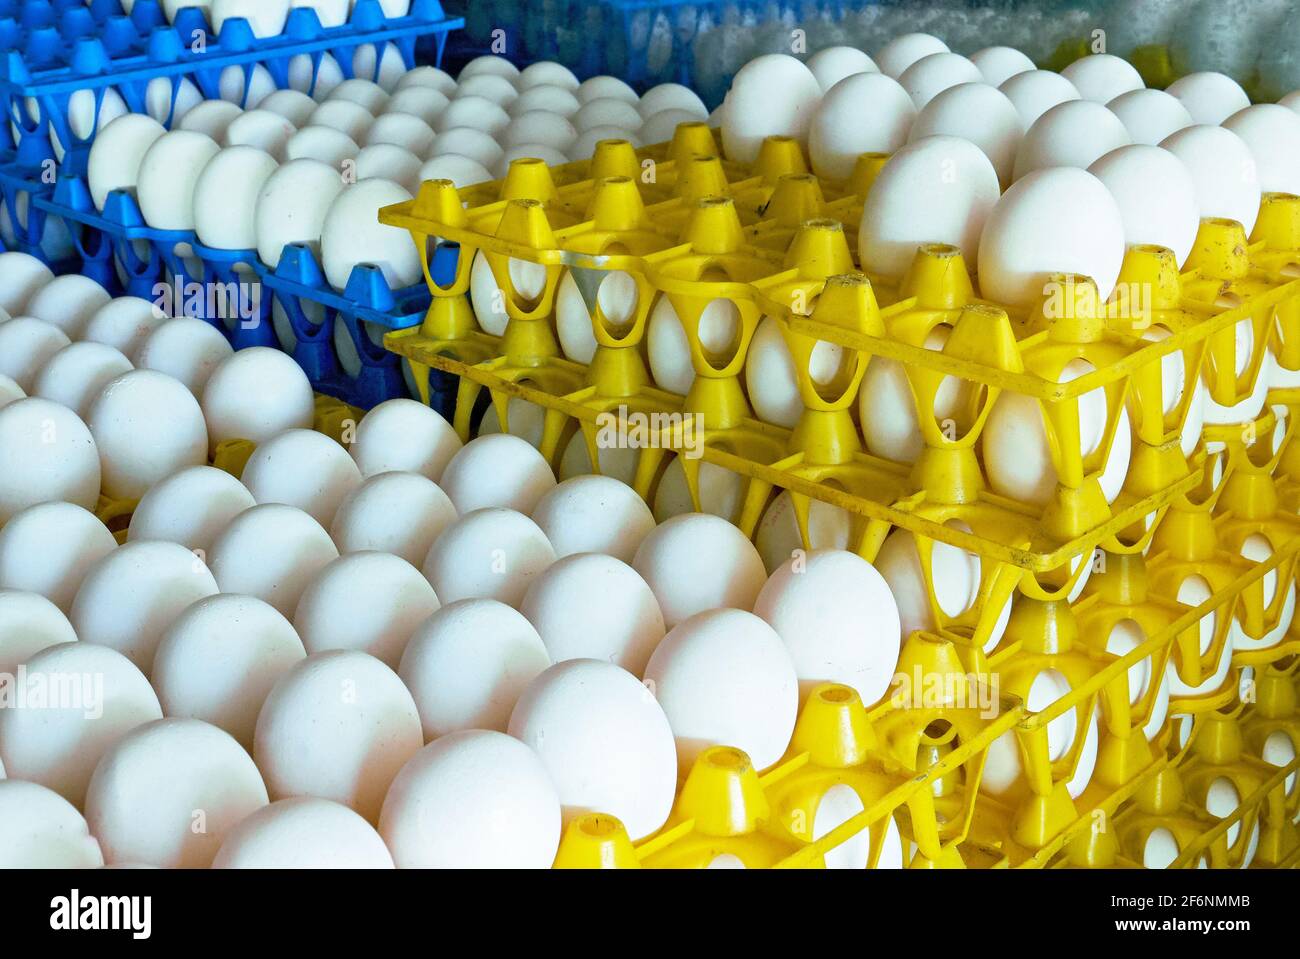 Close-up of colorful yellow and blue plastic trays filled with white chicken eggs, for sale at a market stall in the Philippines, Asia Stock Photo